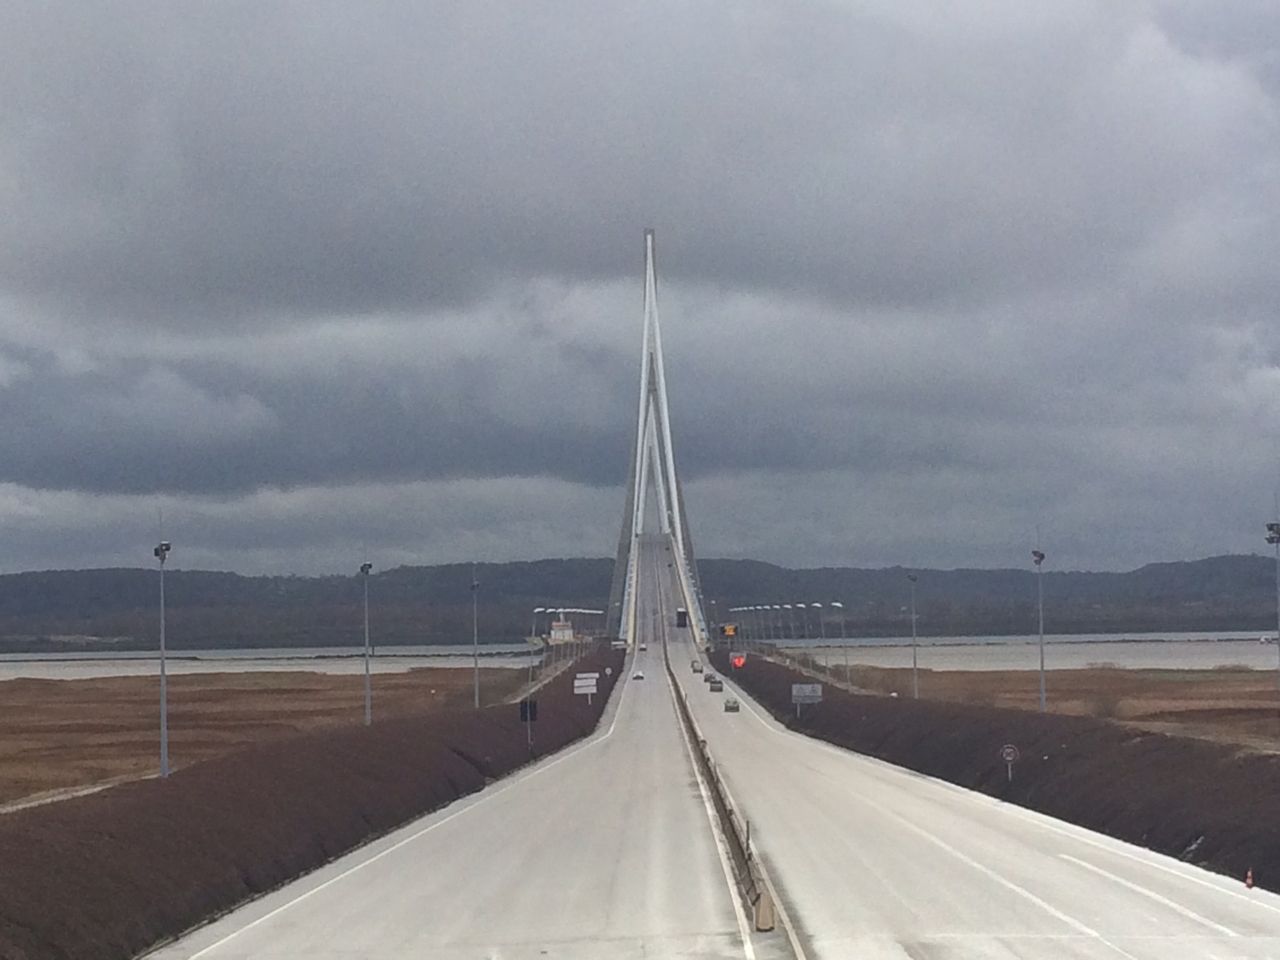 Pont de Normandie - From Toll Point, France